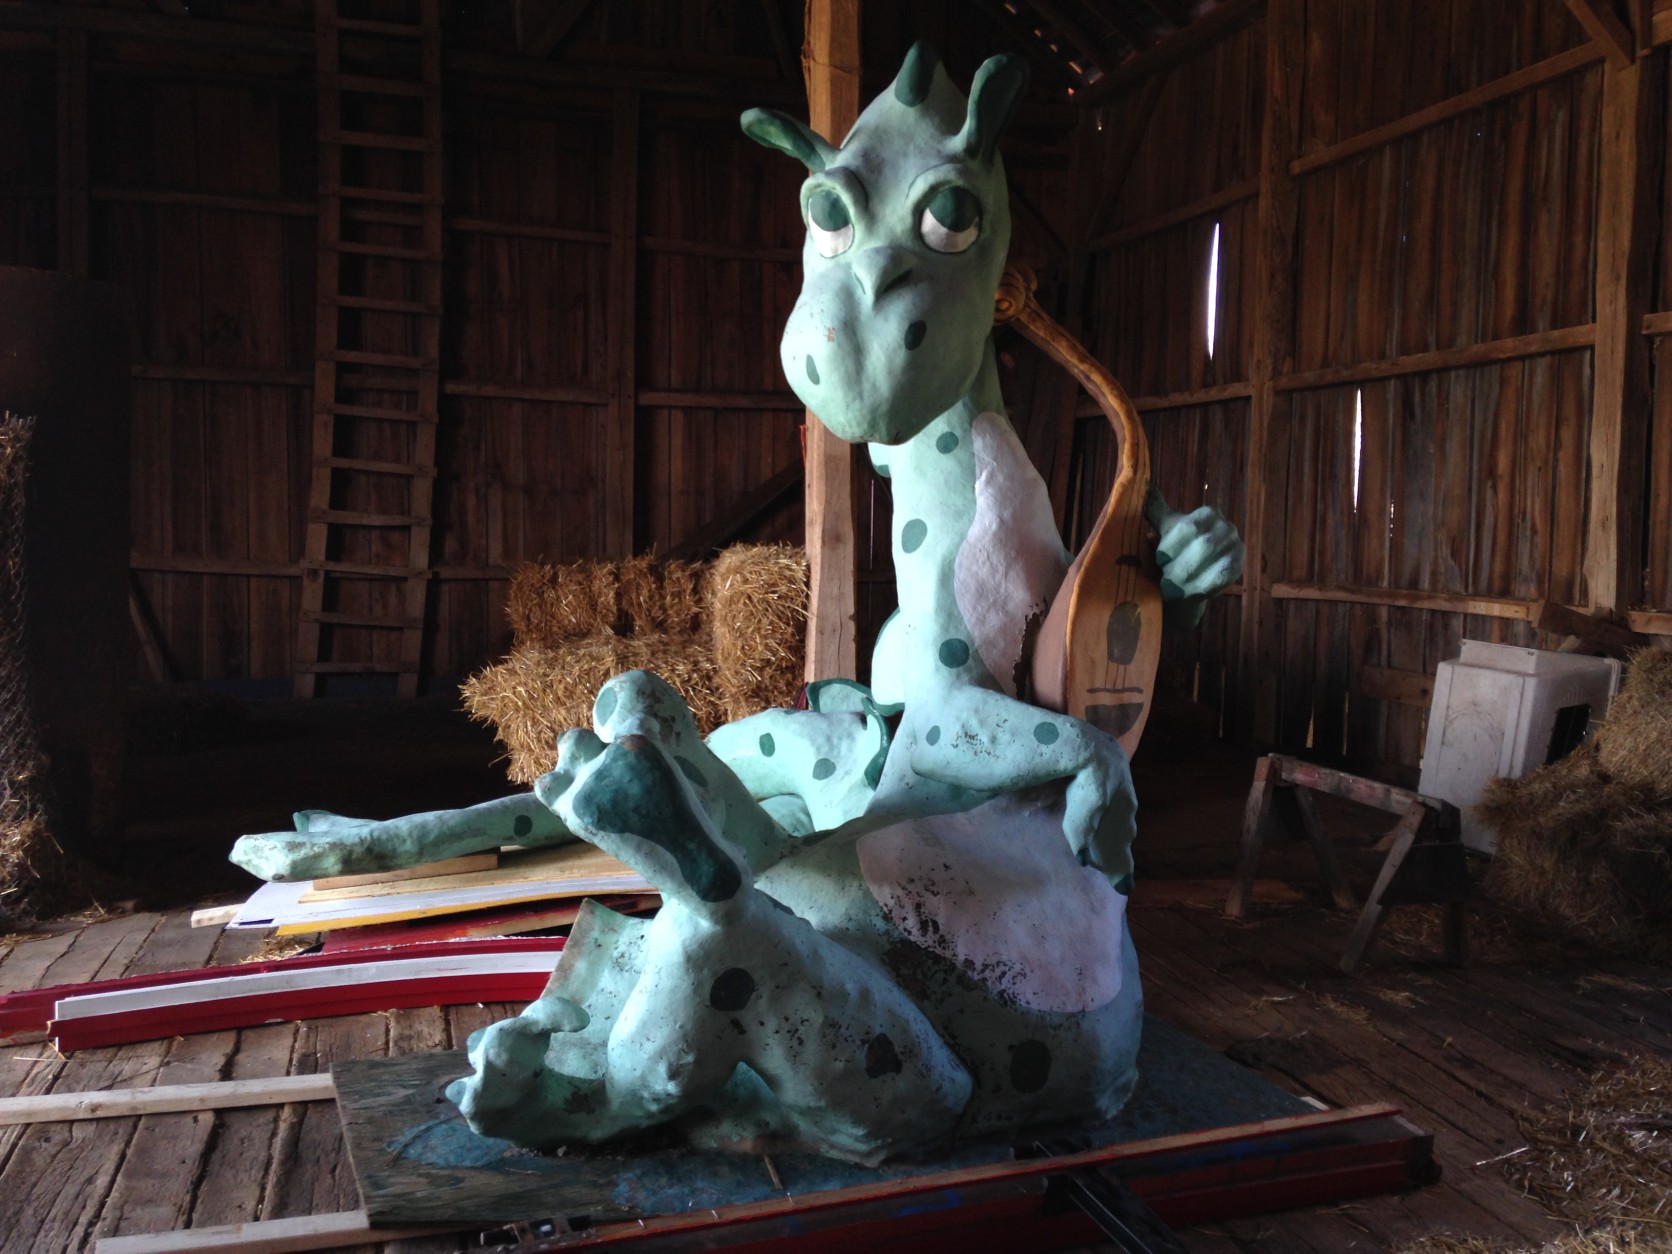 Another look at the big green dragon, who is playing a lute! (WTOP/Michelle Basch)